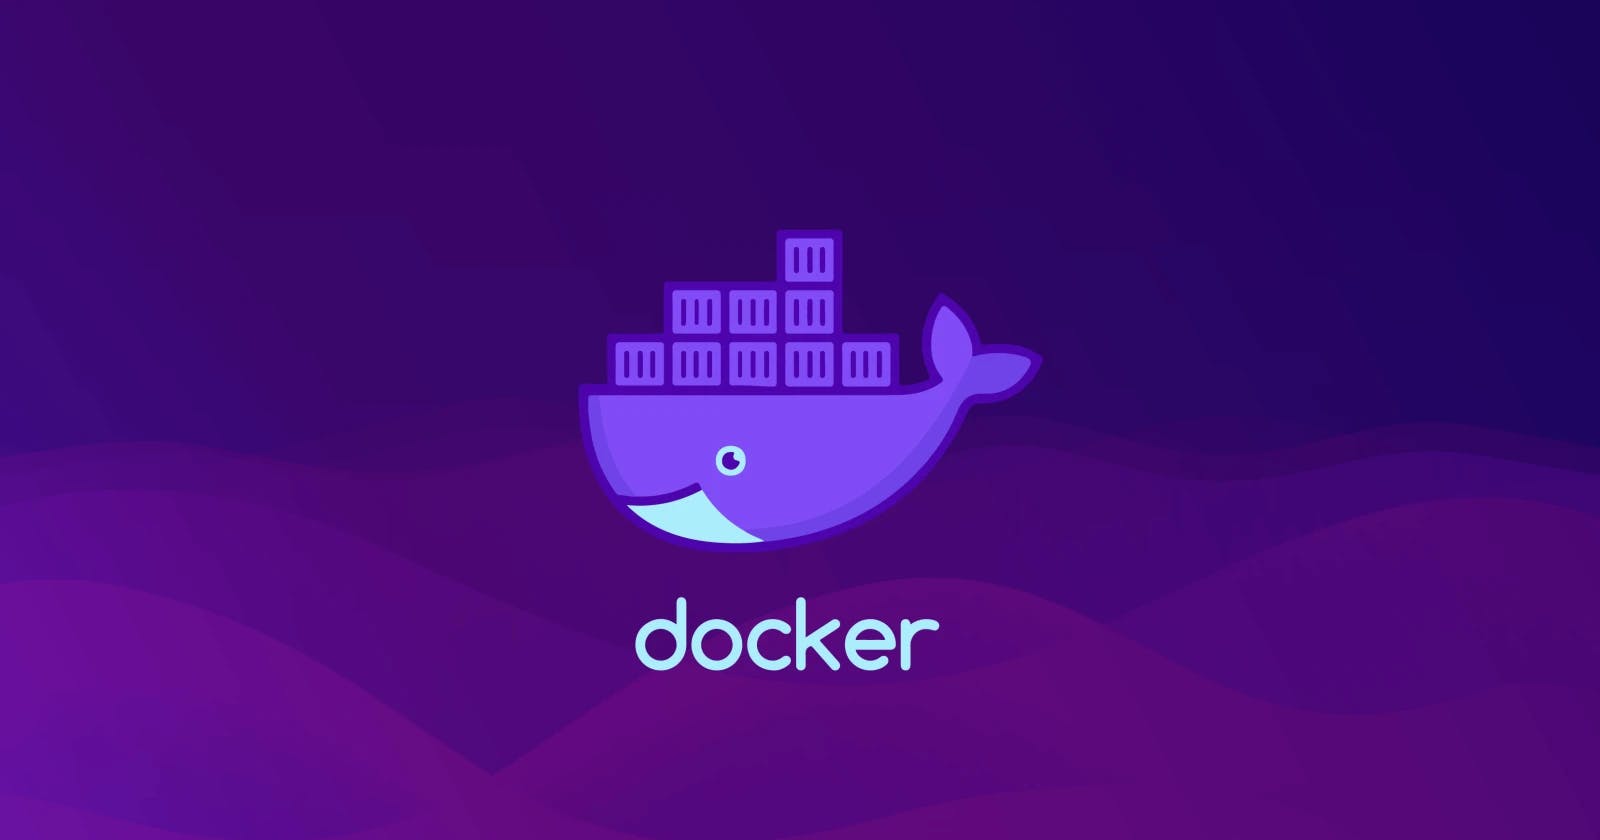 Dockerize any application in minutes